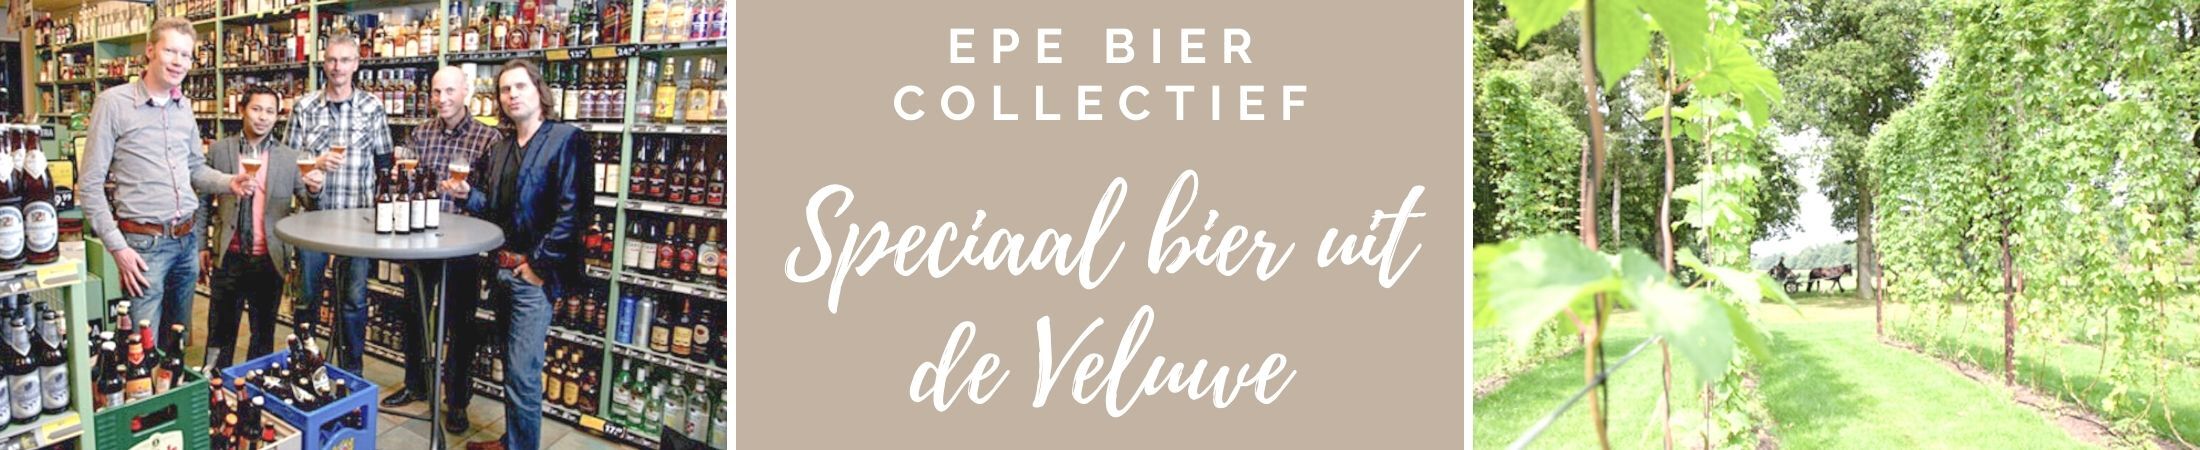 Epe Bier Collectief